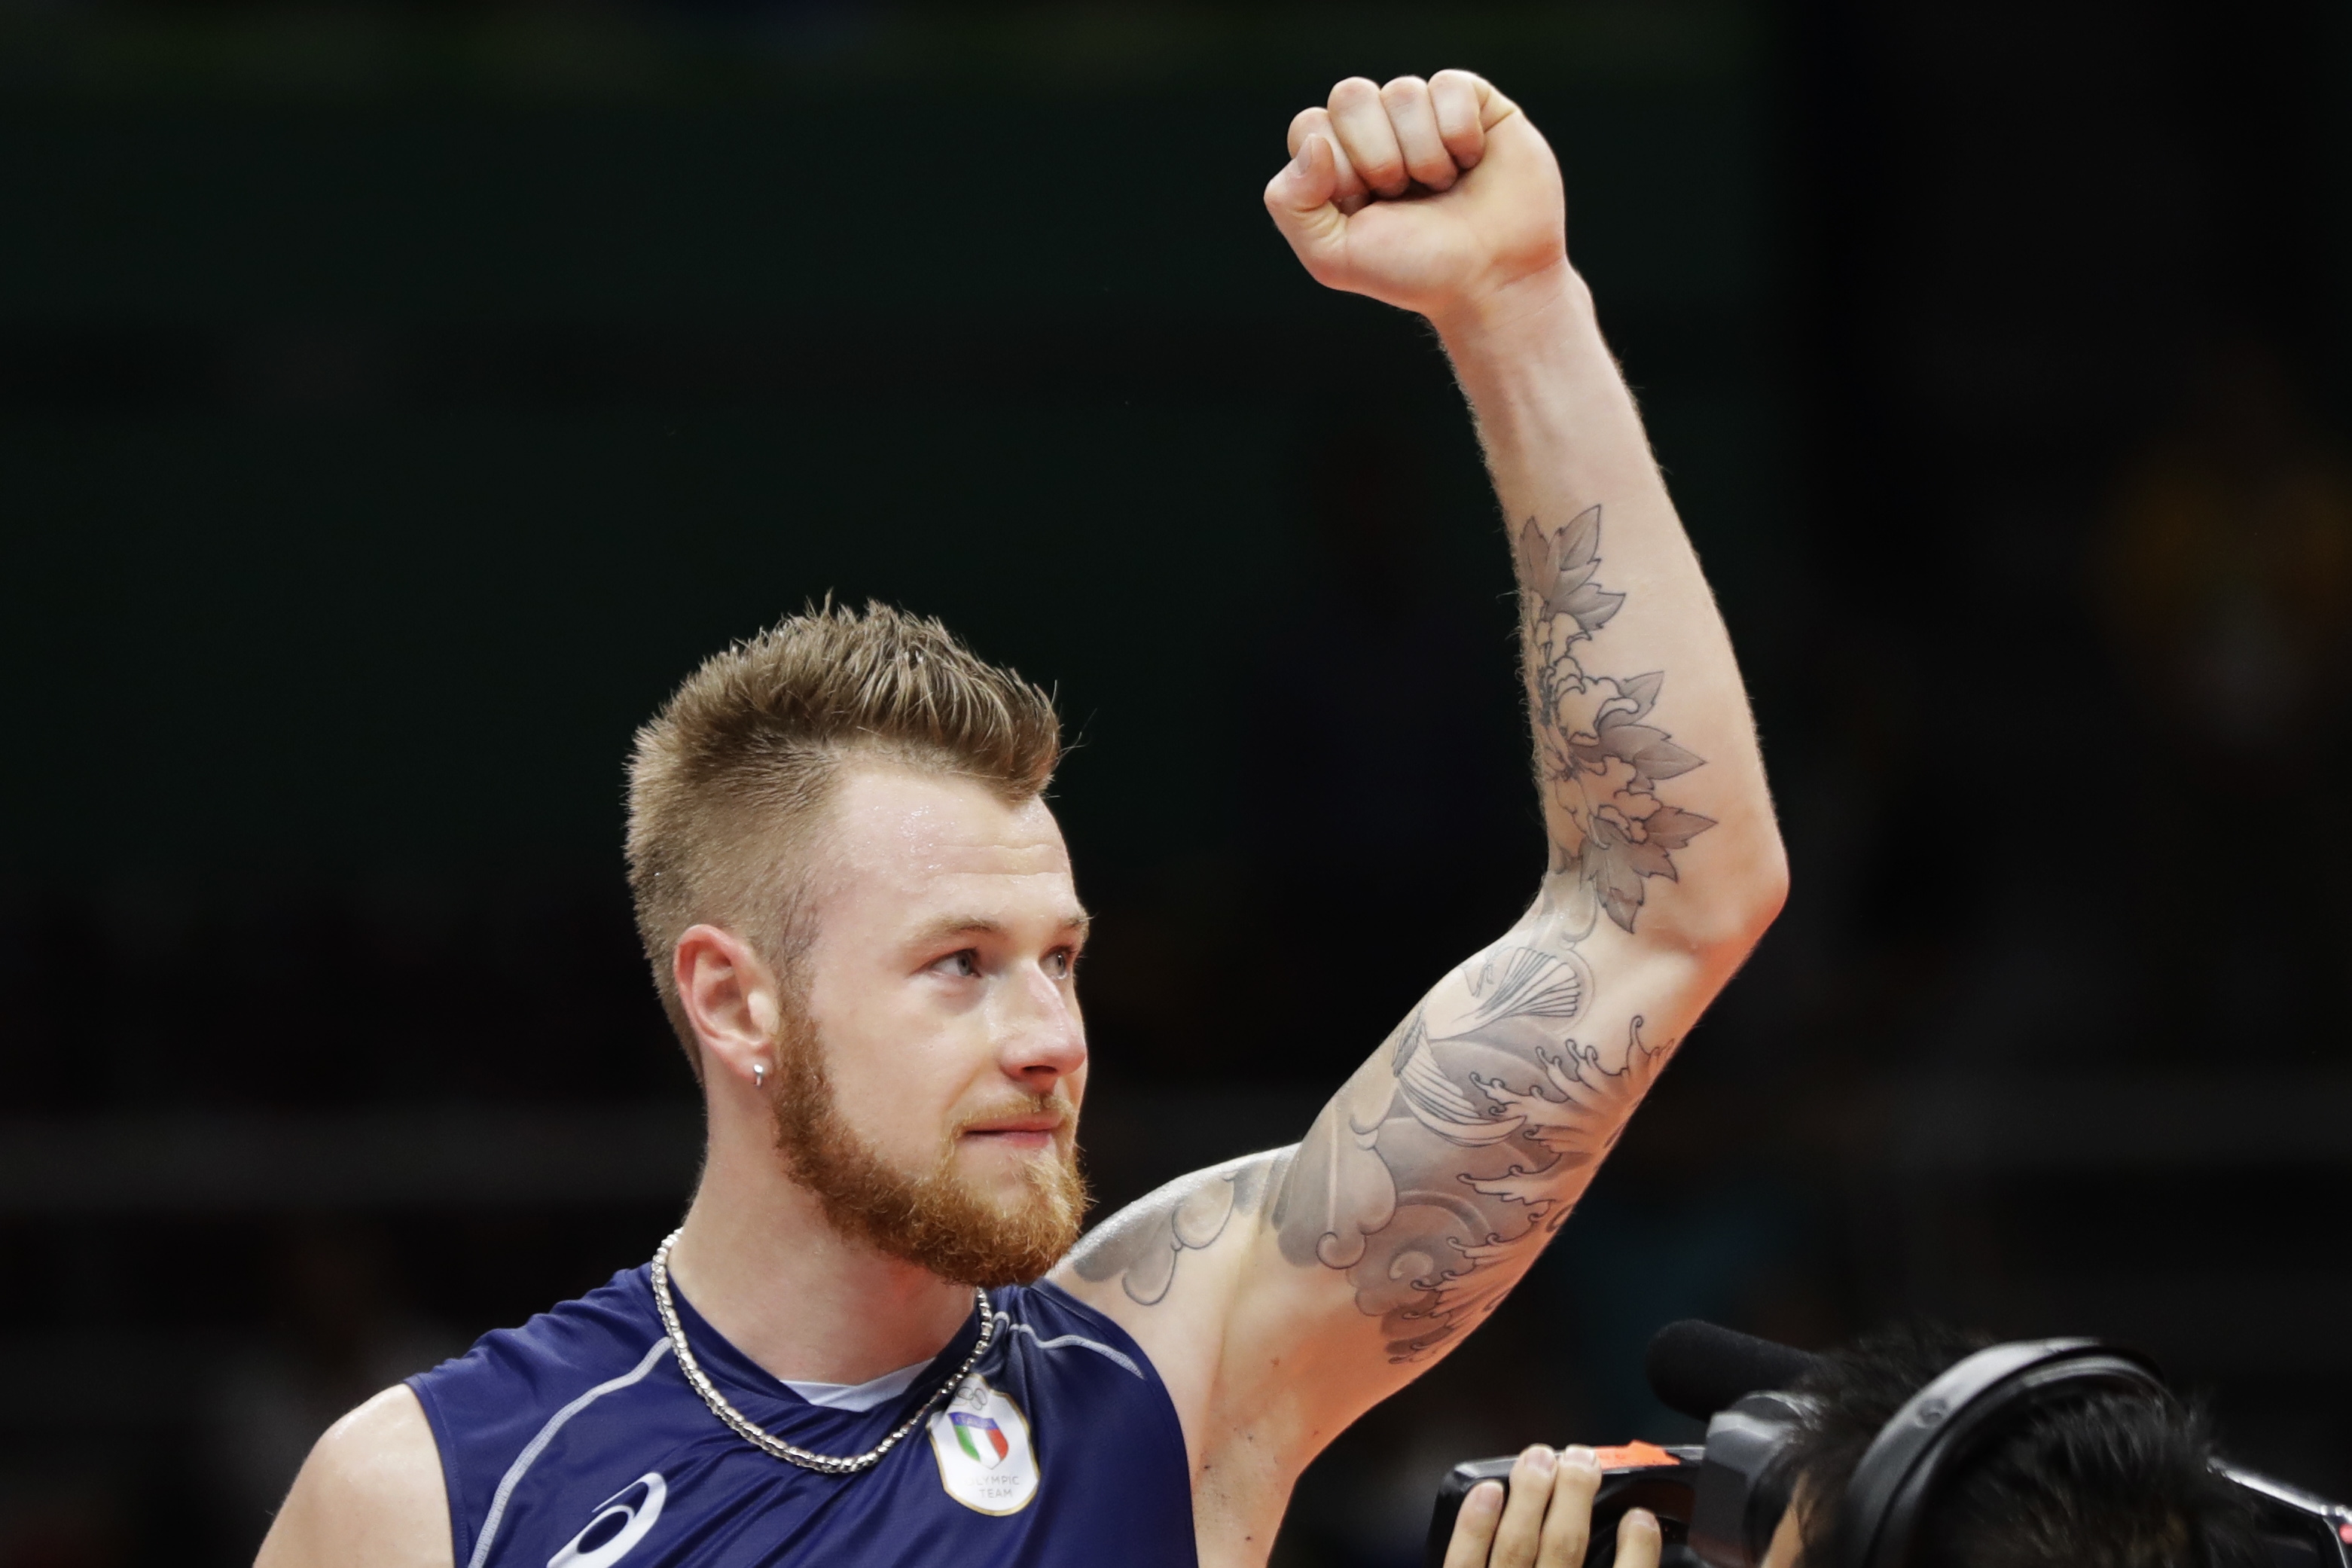 Italy's Ivan Zaytsev celebrates after a men's quarterfinal volleyball match against Iran at the 2016 Summer Olympics in Rio de Janeiro, Brazil, Wednesday, Aug. 17, 2016. (AP Photo/Matt Rourke)